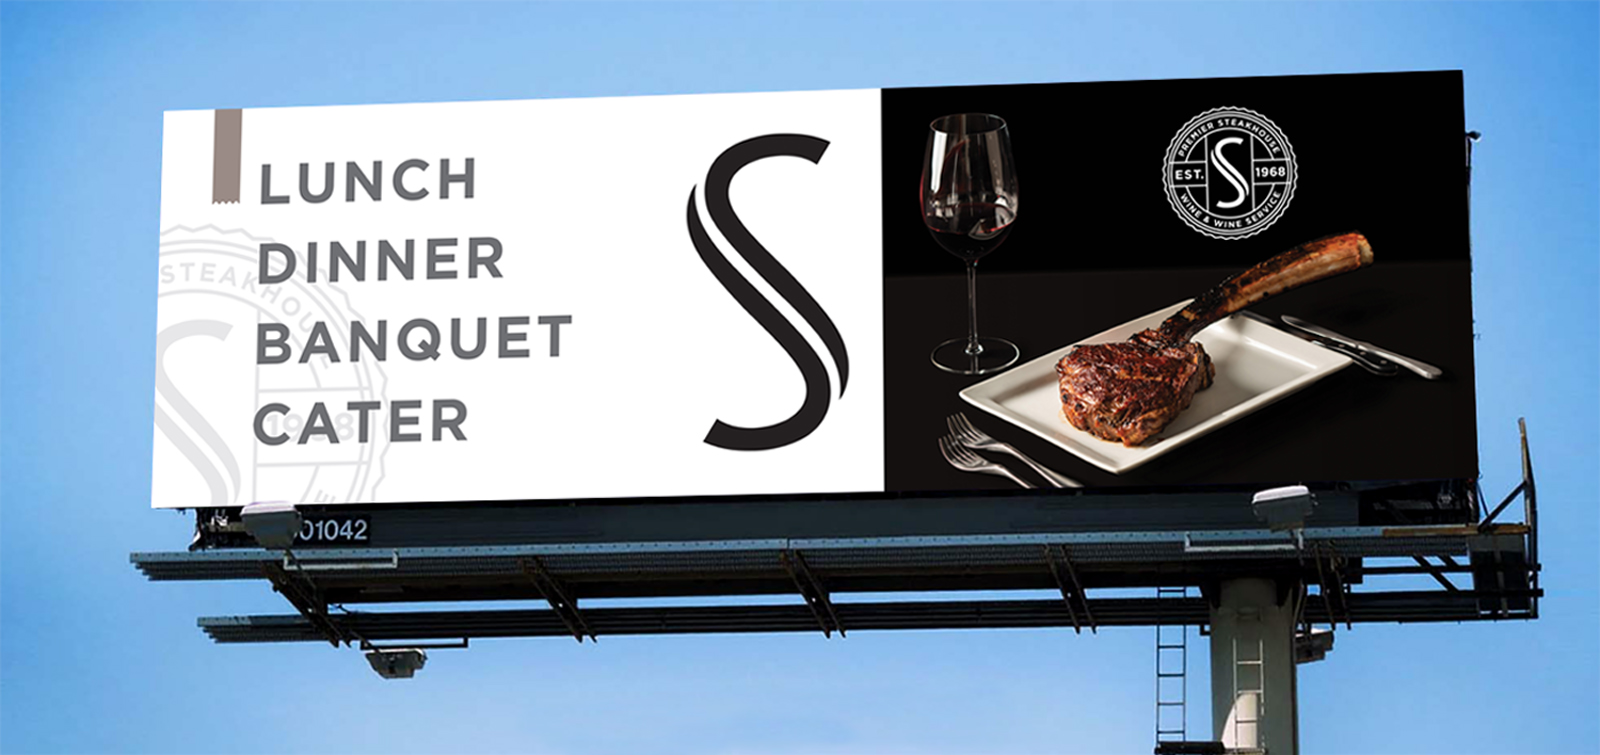 Brand logo on advertising billboard for the Scotch and Sirloin